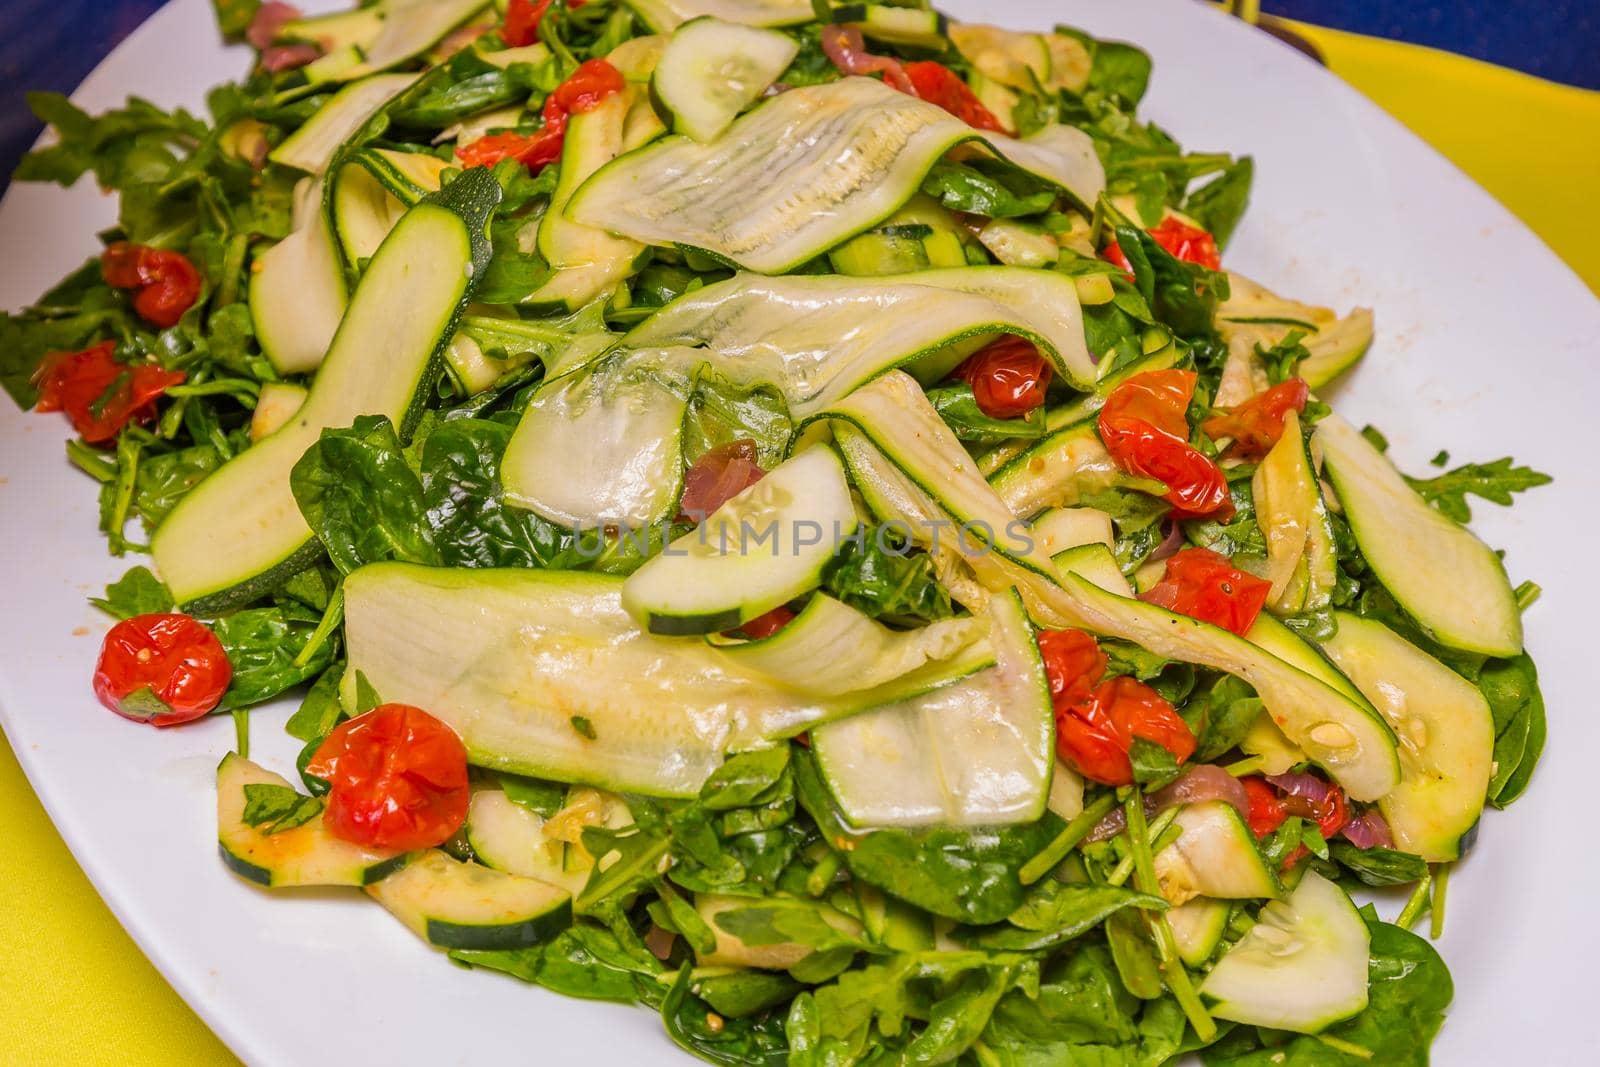 Green salad with cucumber and cherry tomato, served on white plate